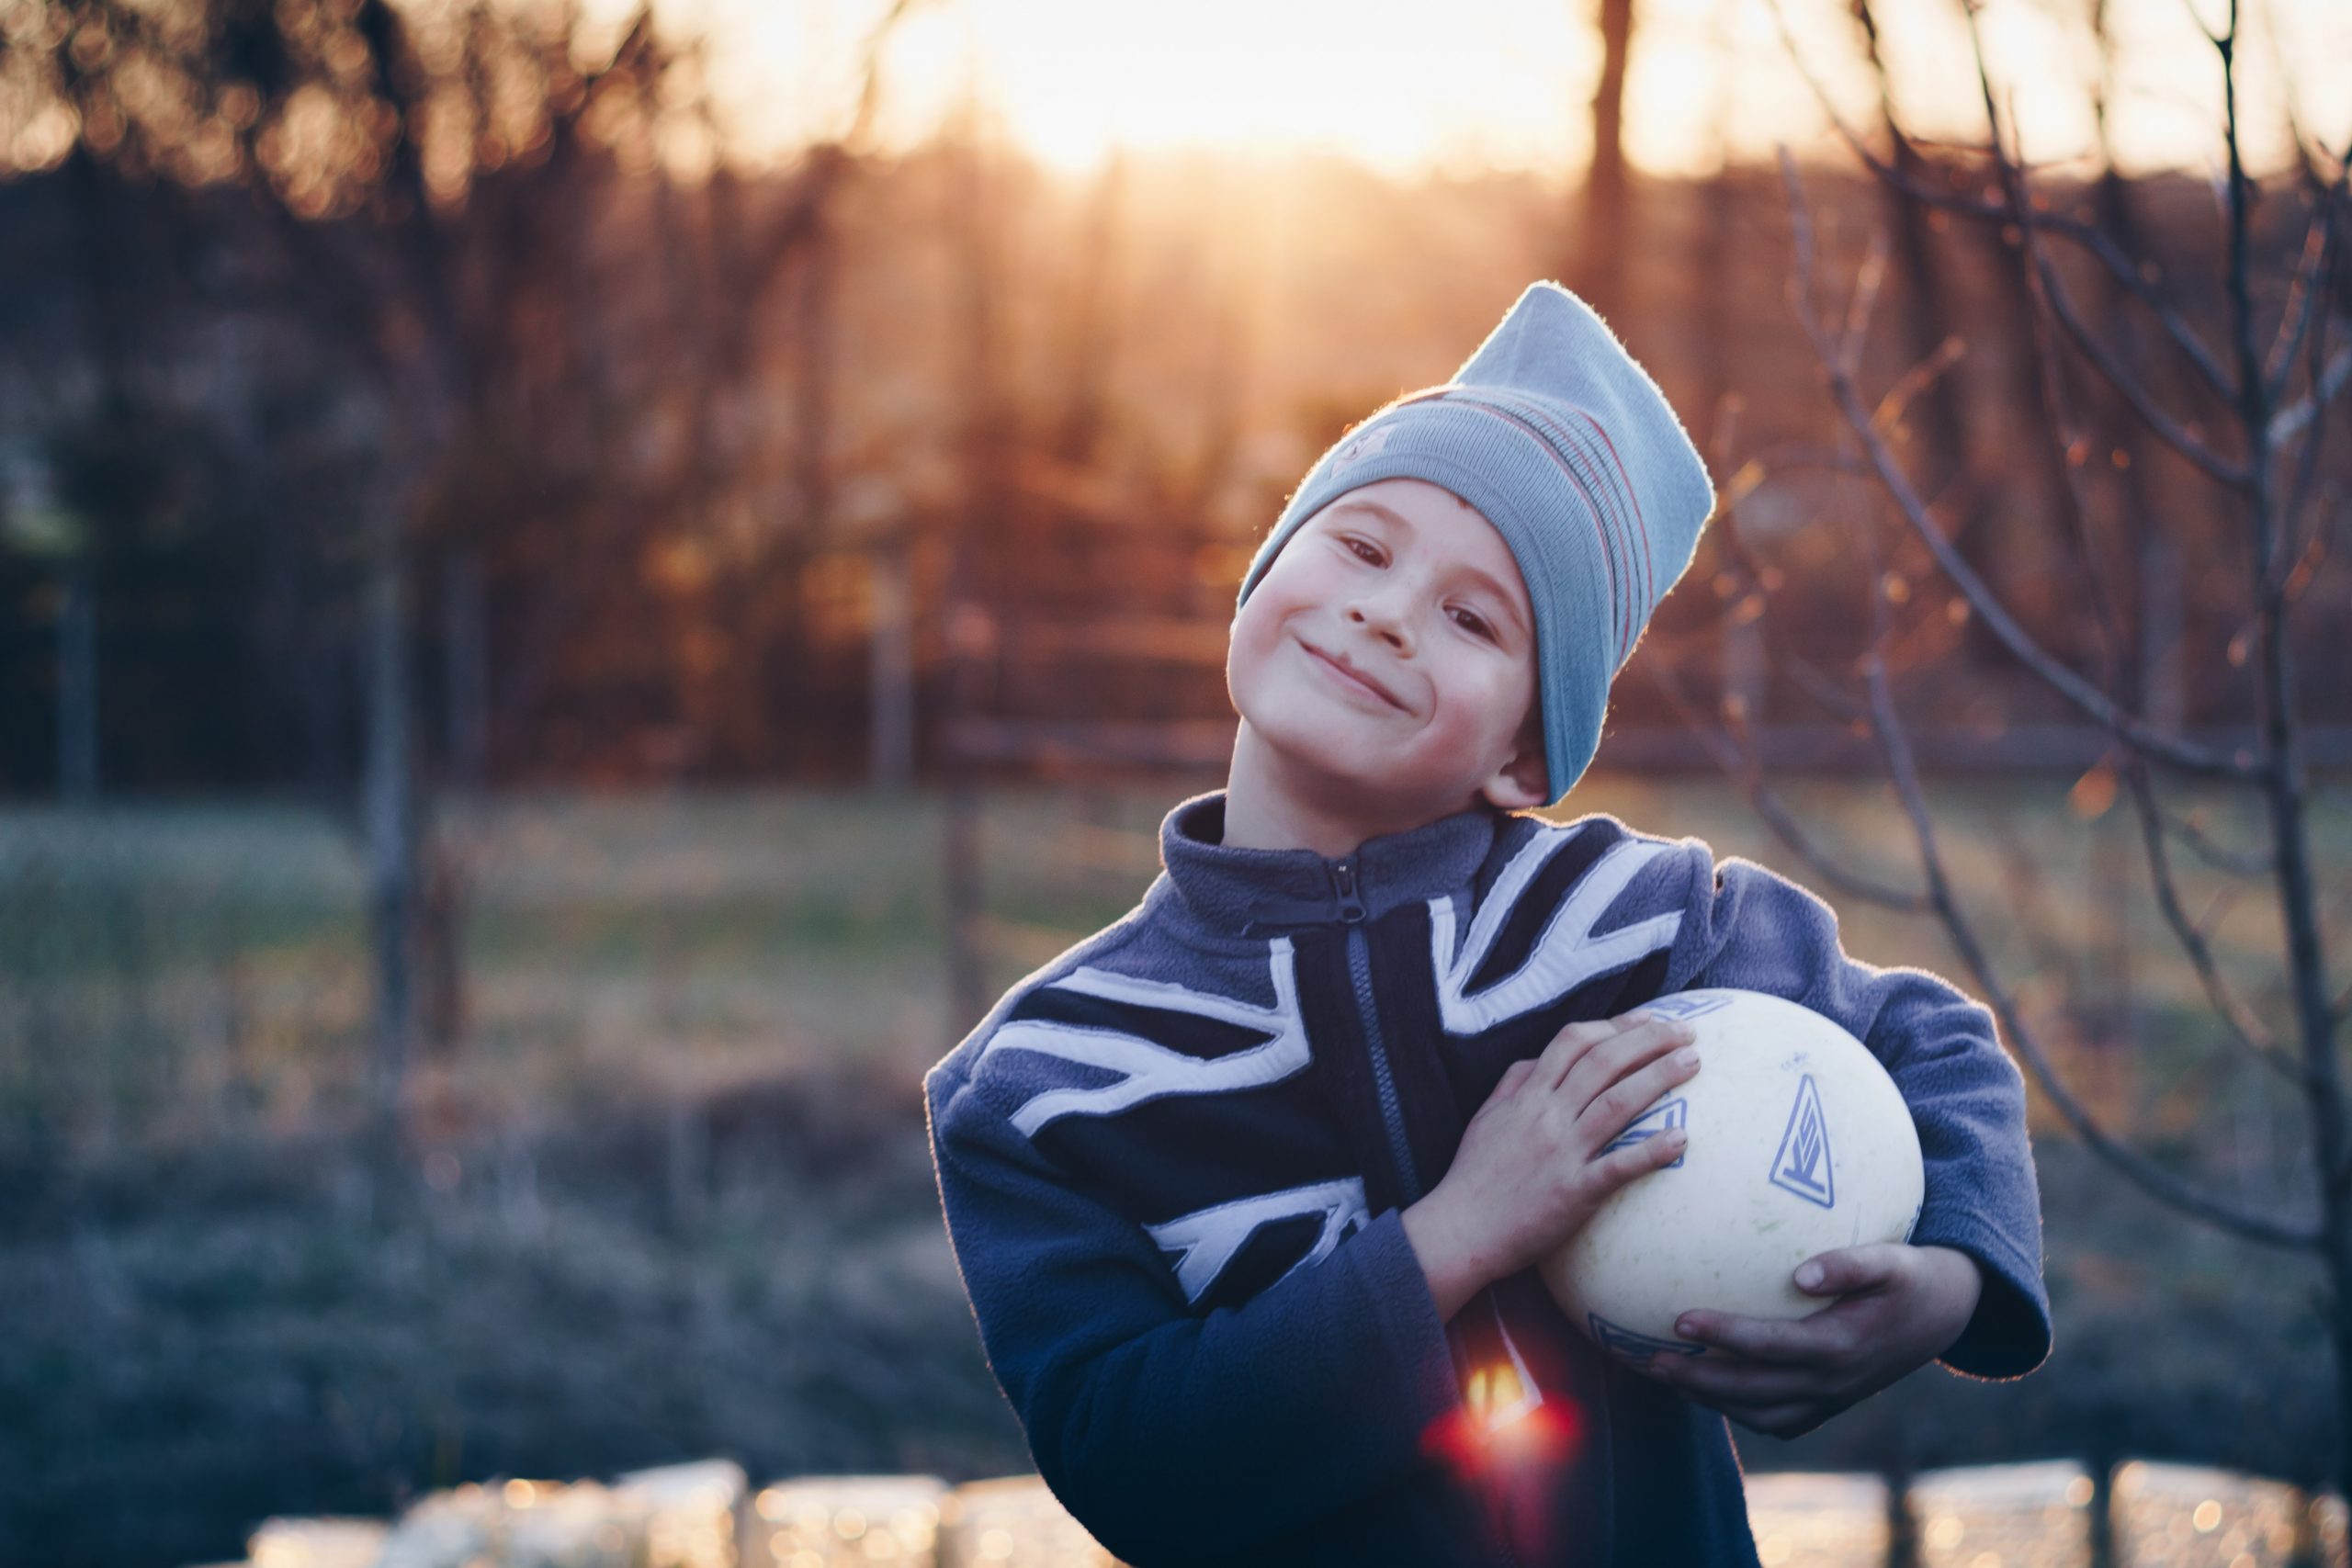 young boy proudly holding a soccer ball